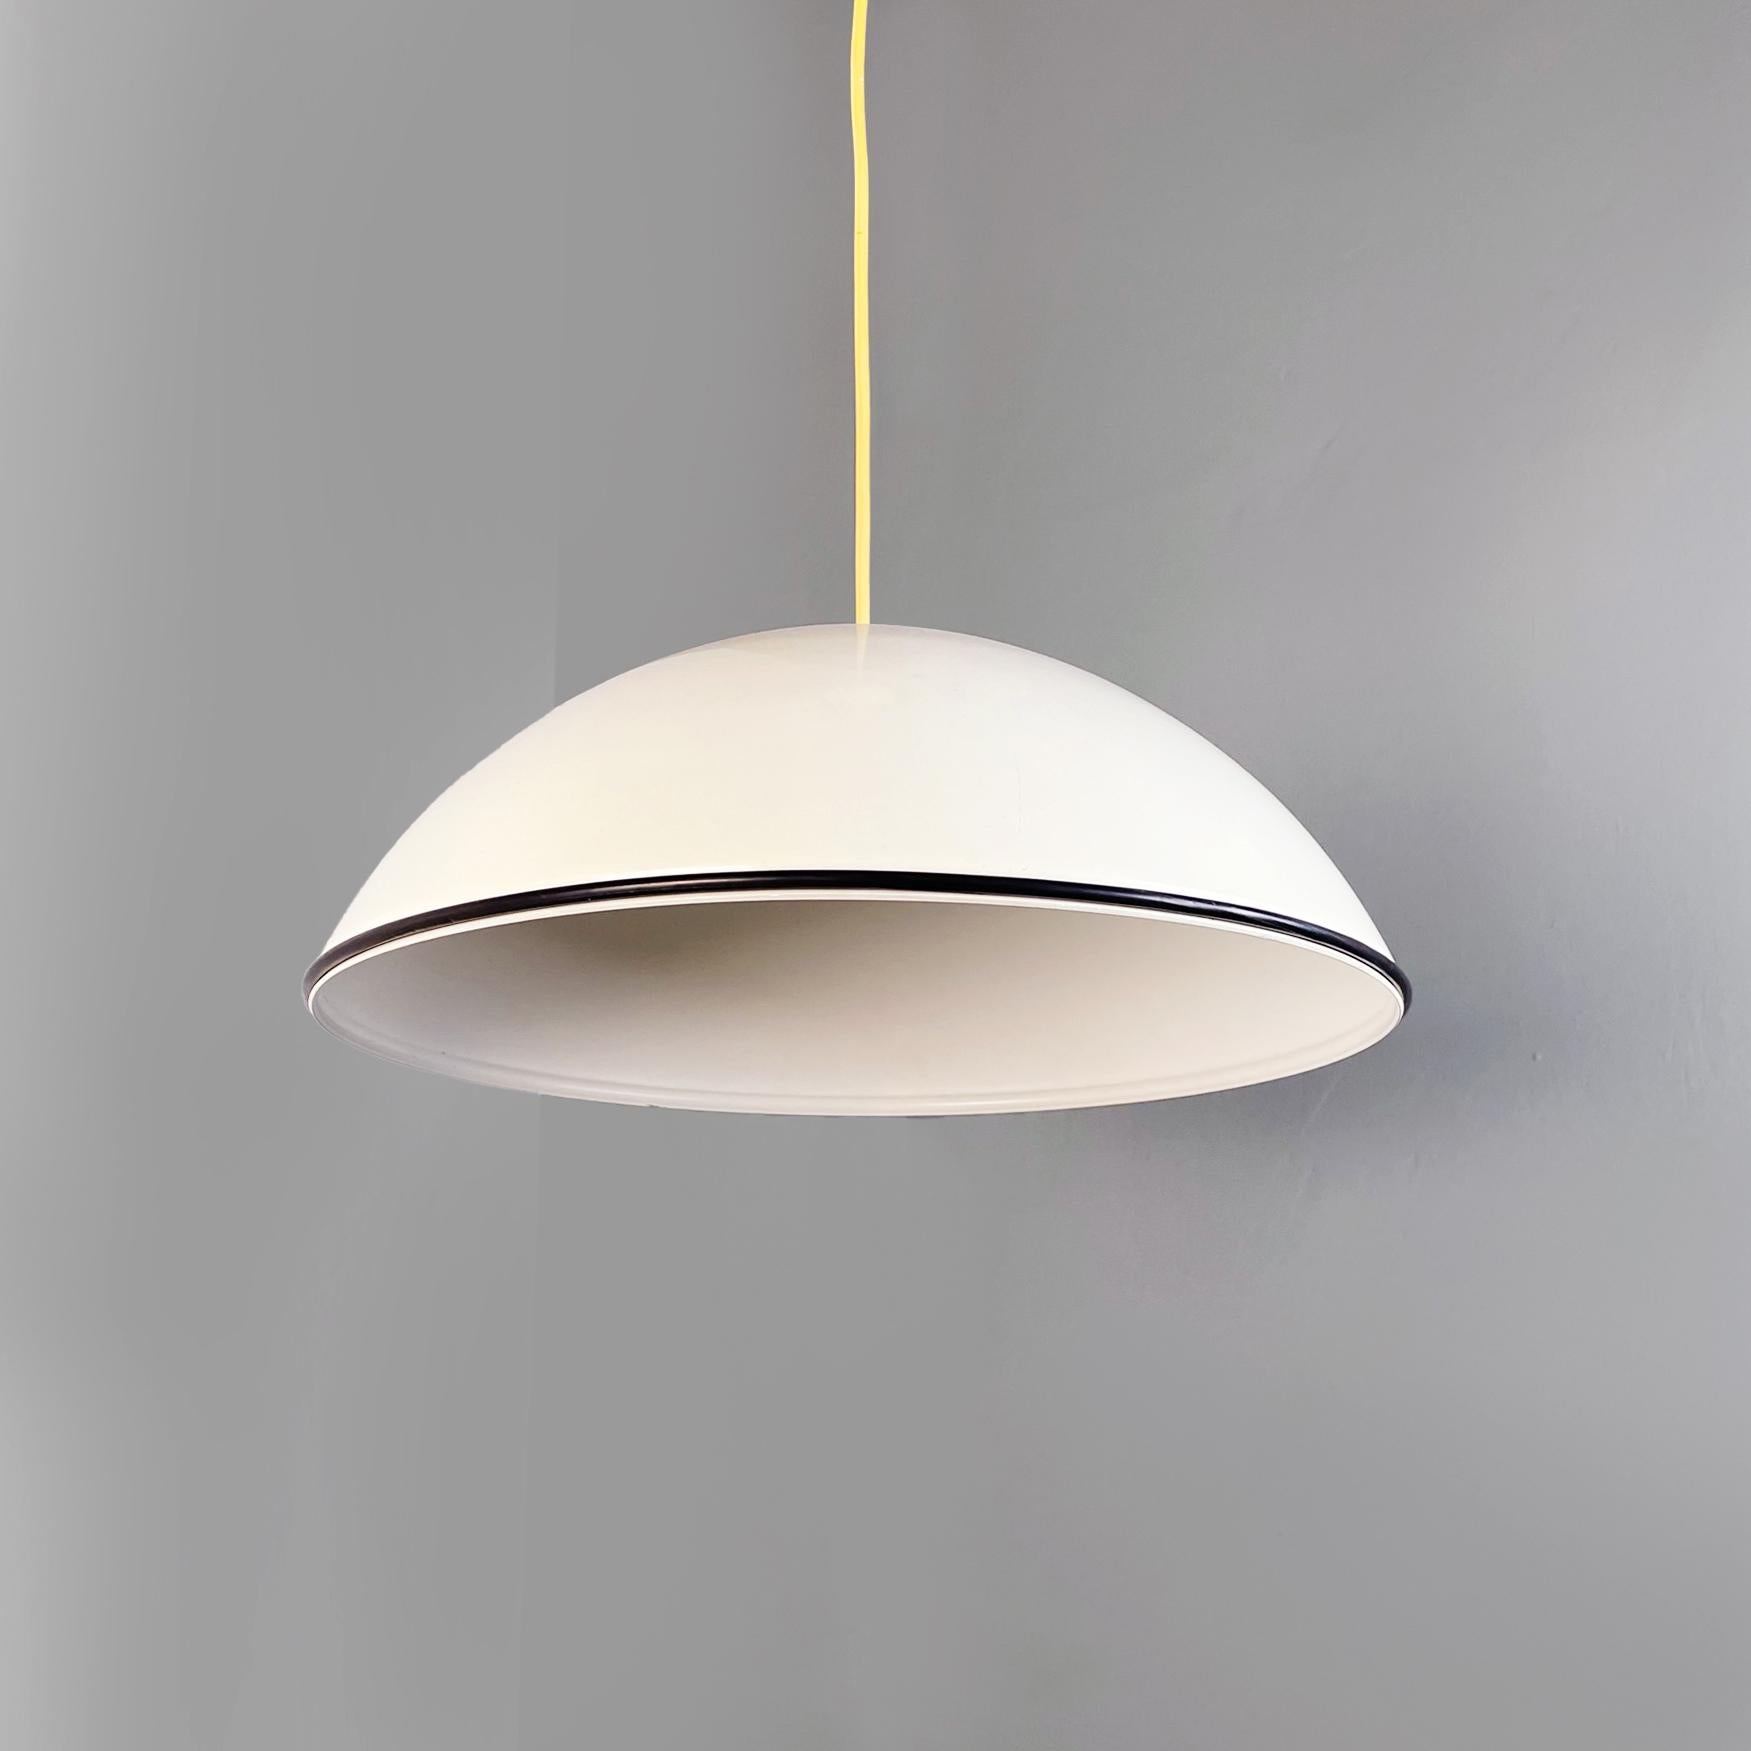 Italian mid-century metal Suspension lamp Relemme by Castiglioni for Flos, 1970s
Iconic suspension lamp mod. Relemme with hemispherical lampshade in white enamelled aluminium, equipped with a silver dome reflection bulb. The lower edge of the